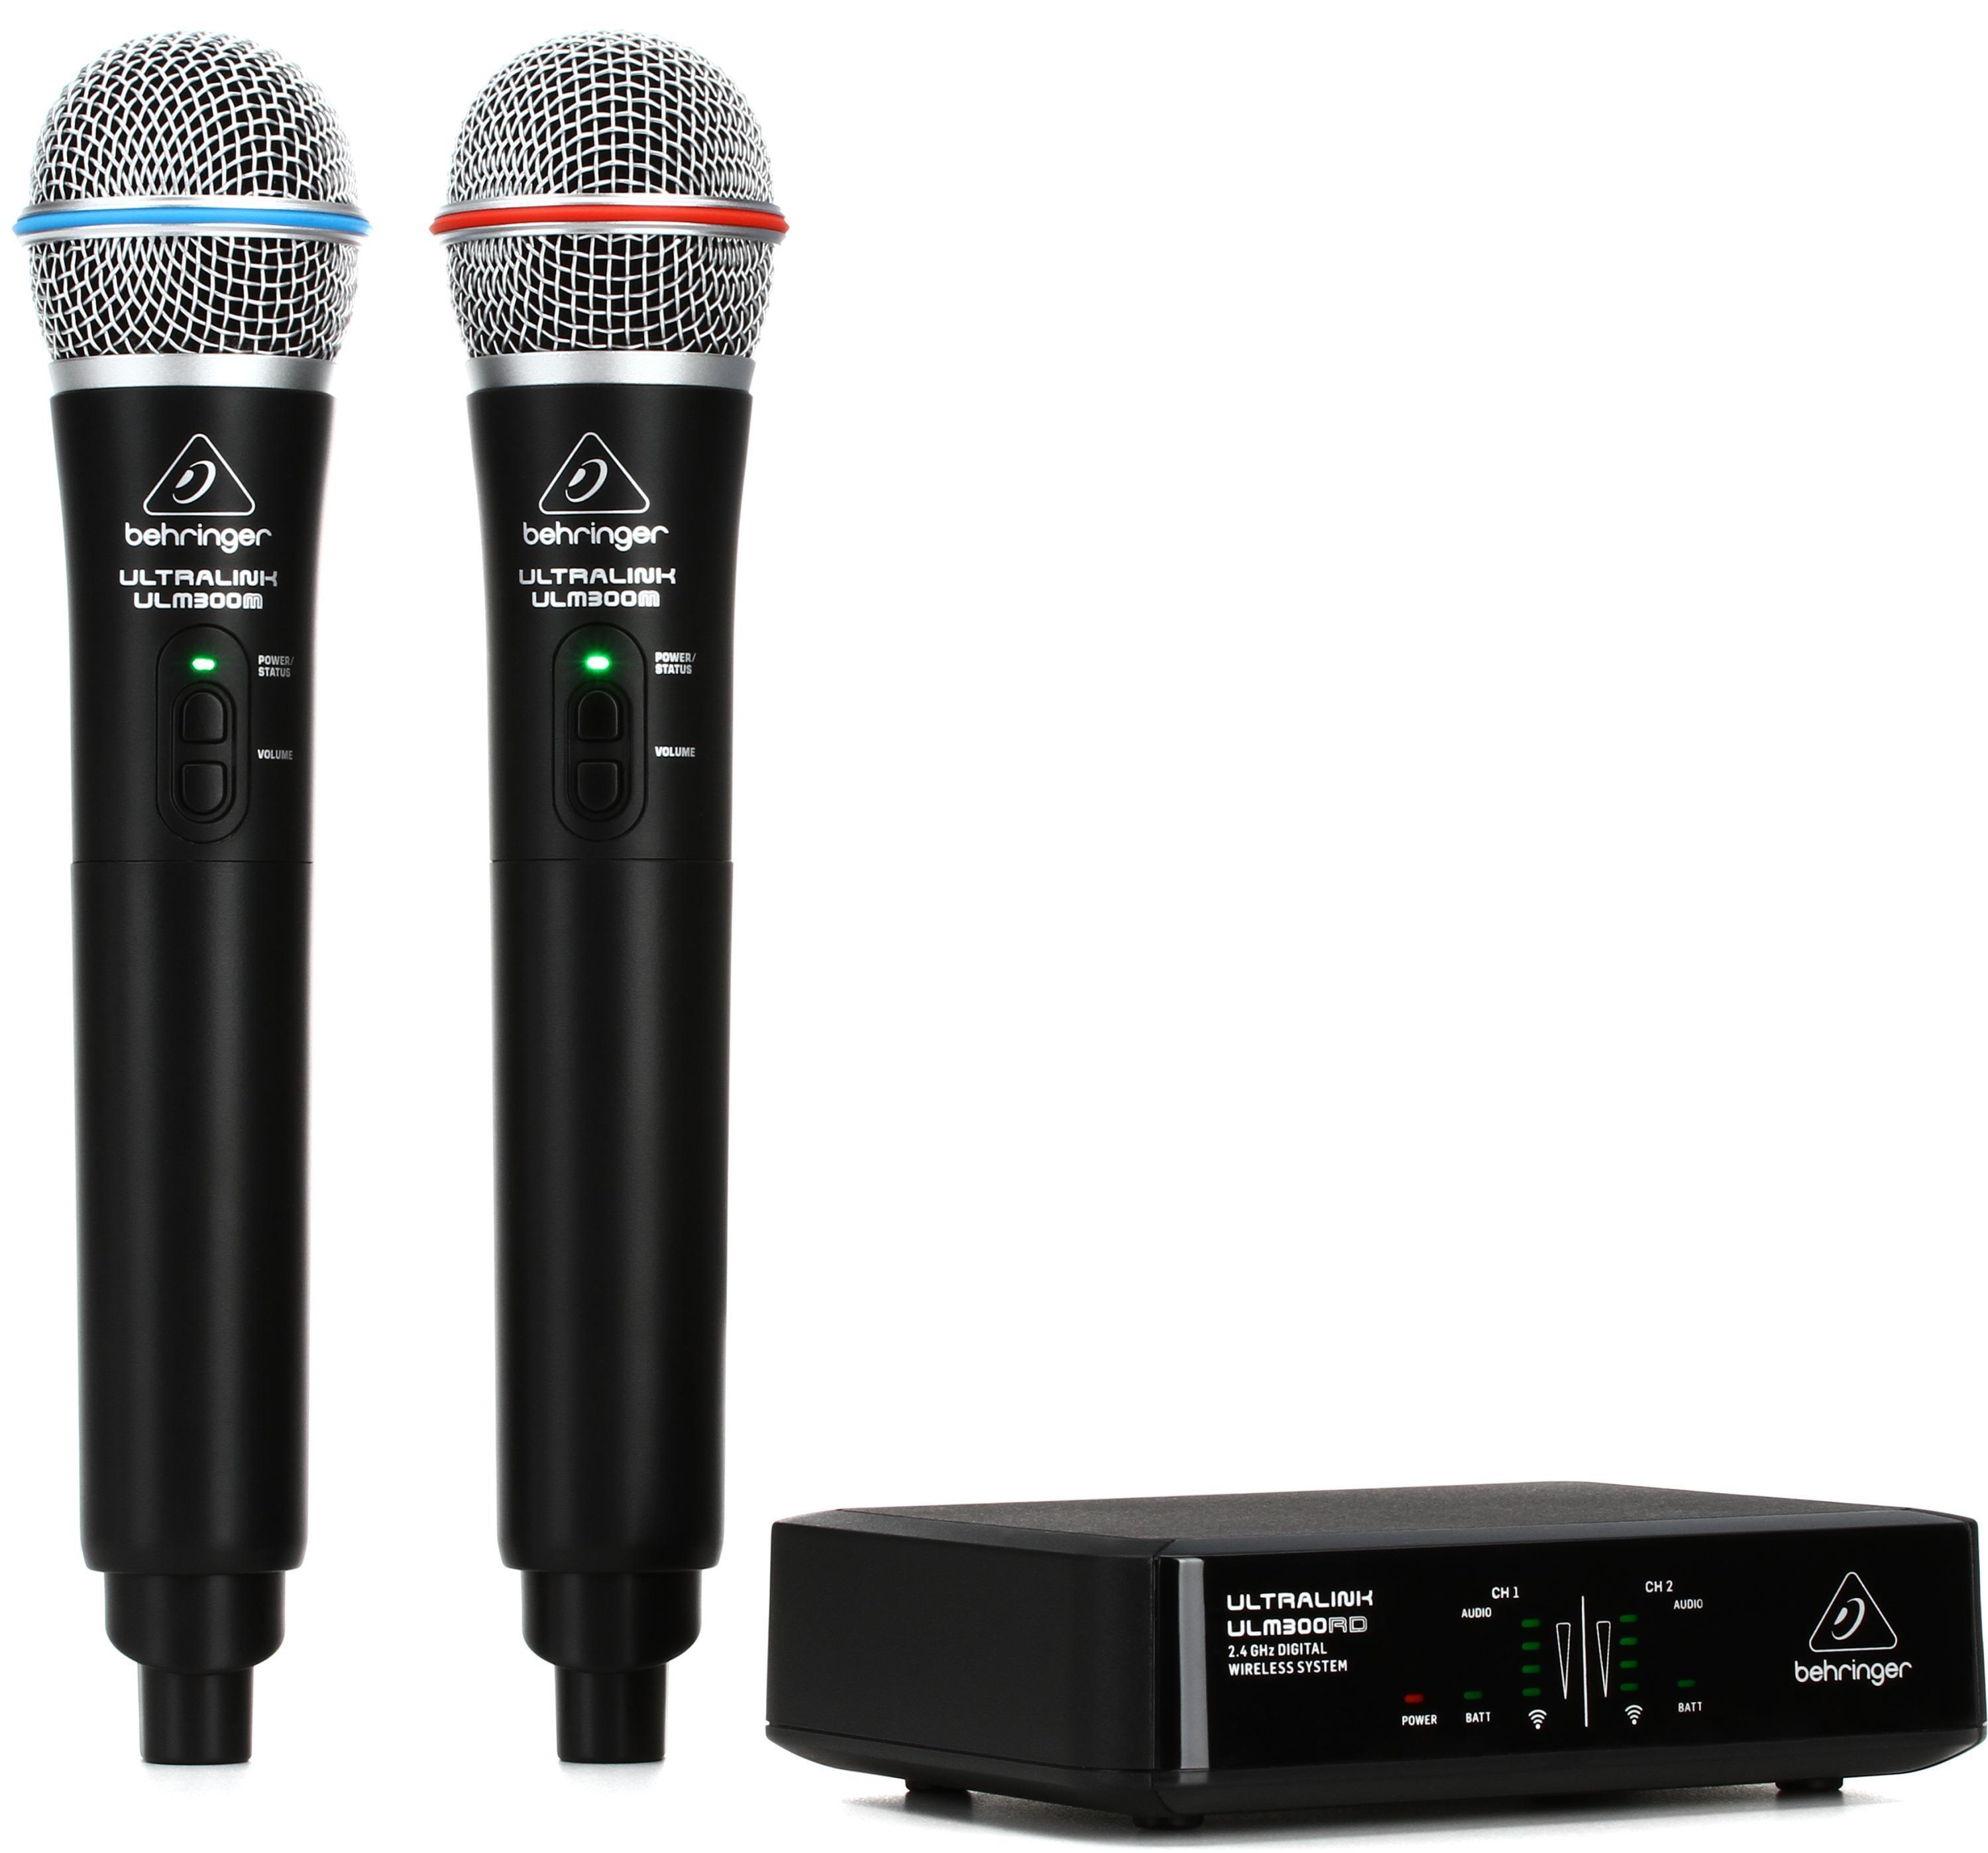 Wireless Microphone Systems - Sight & Sound Fort Frances